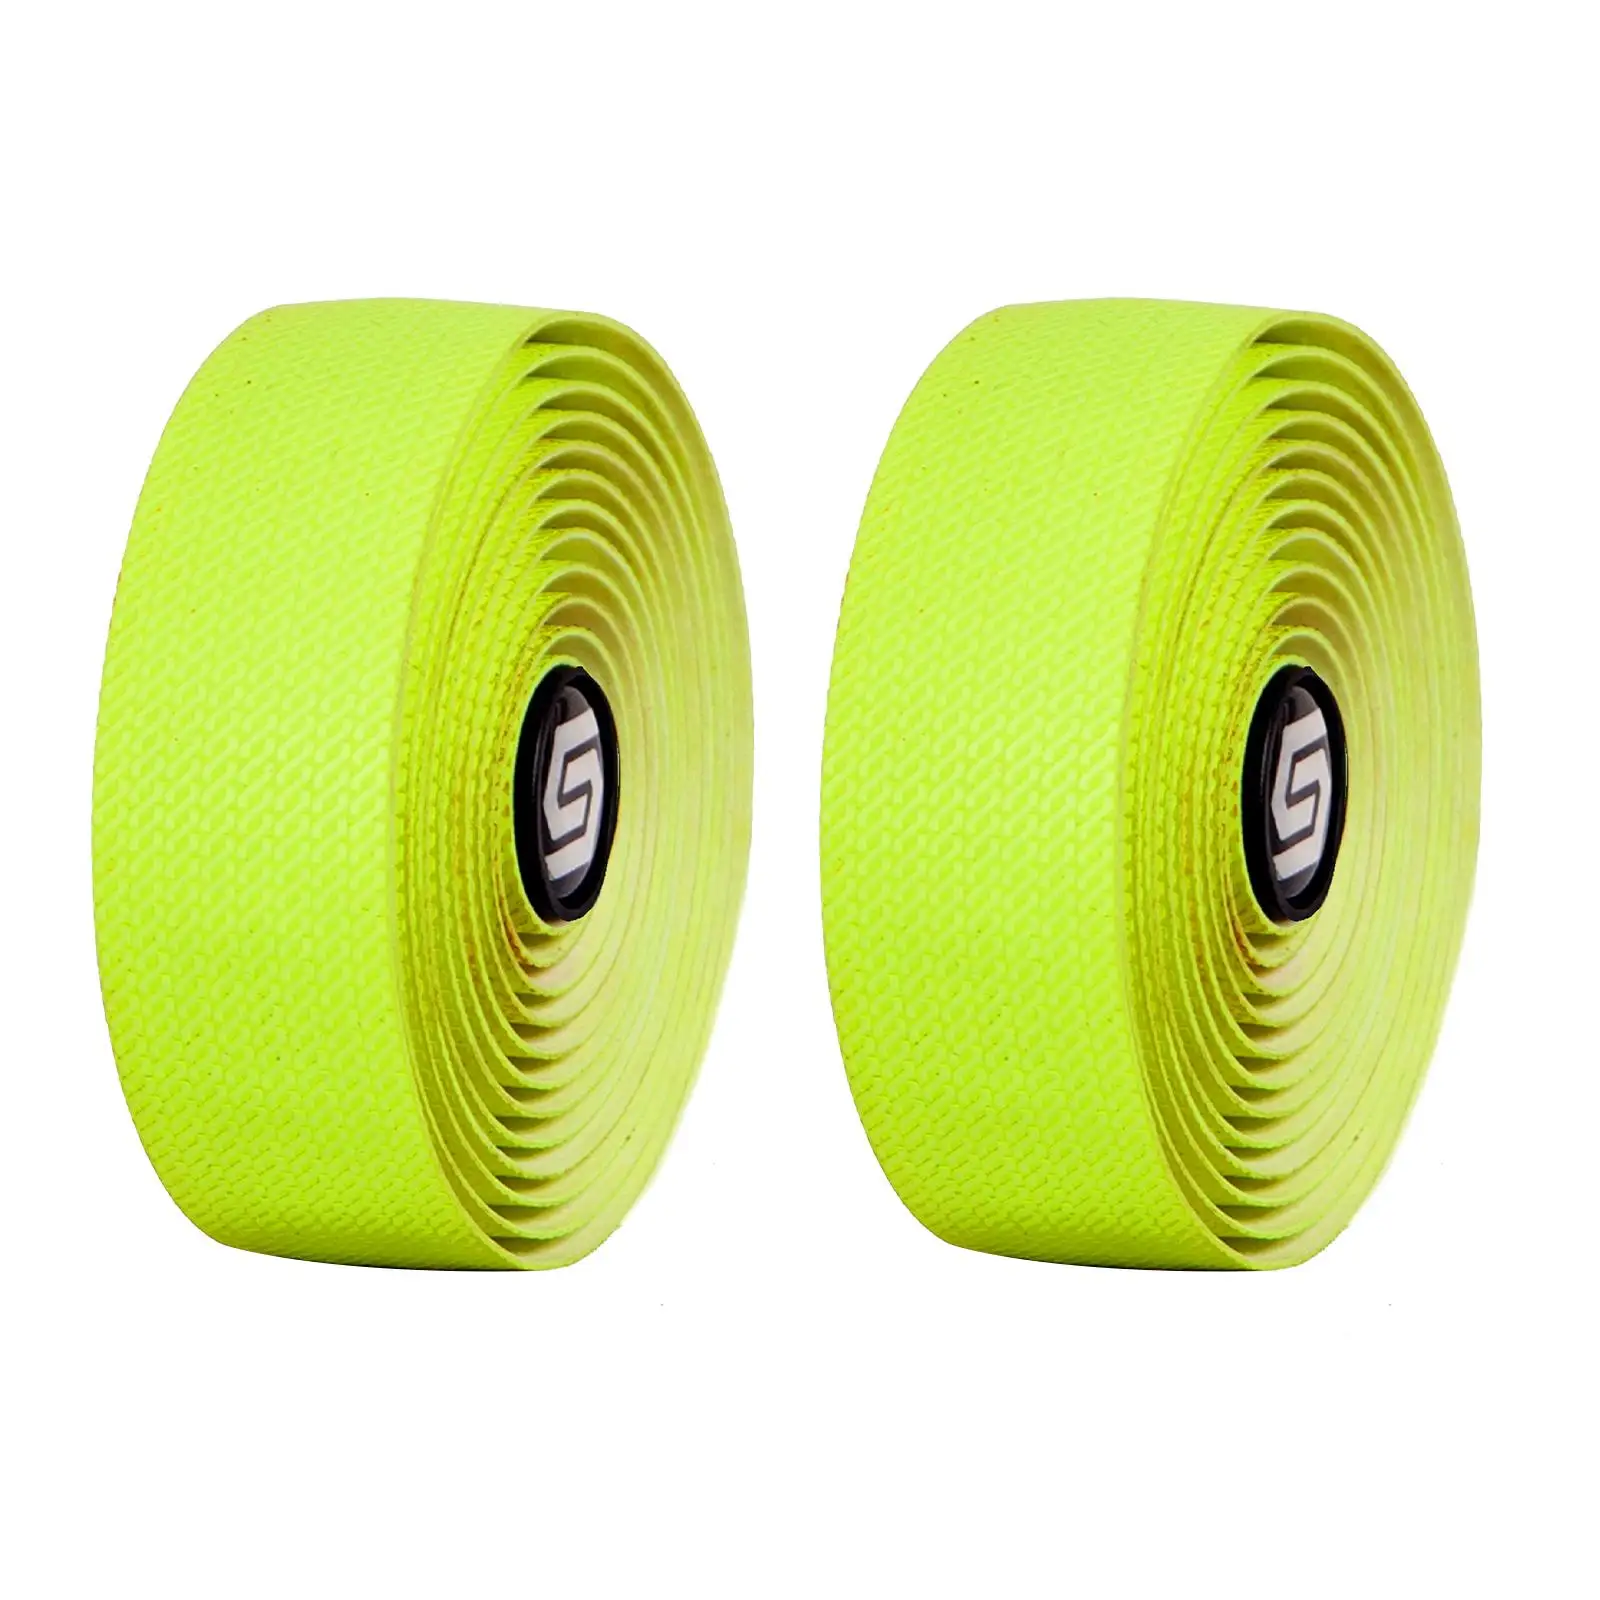 Bicycle handlebar tape handlebar tape handlebar tape with bar end